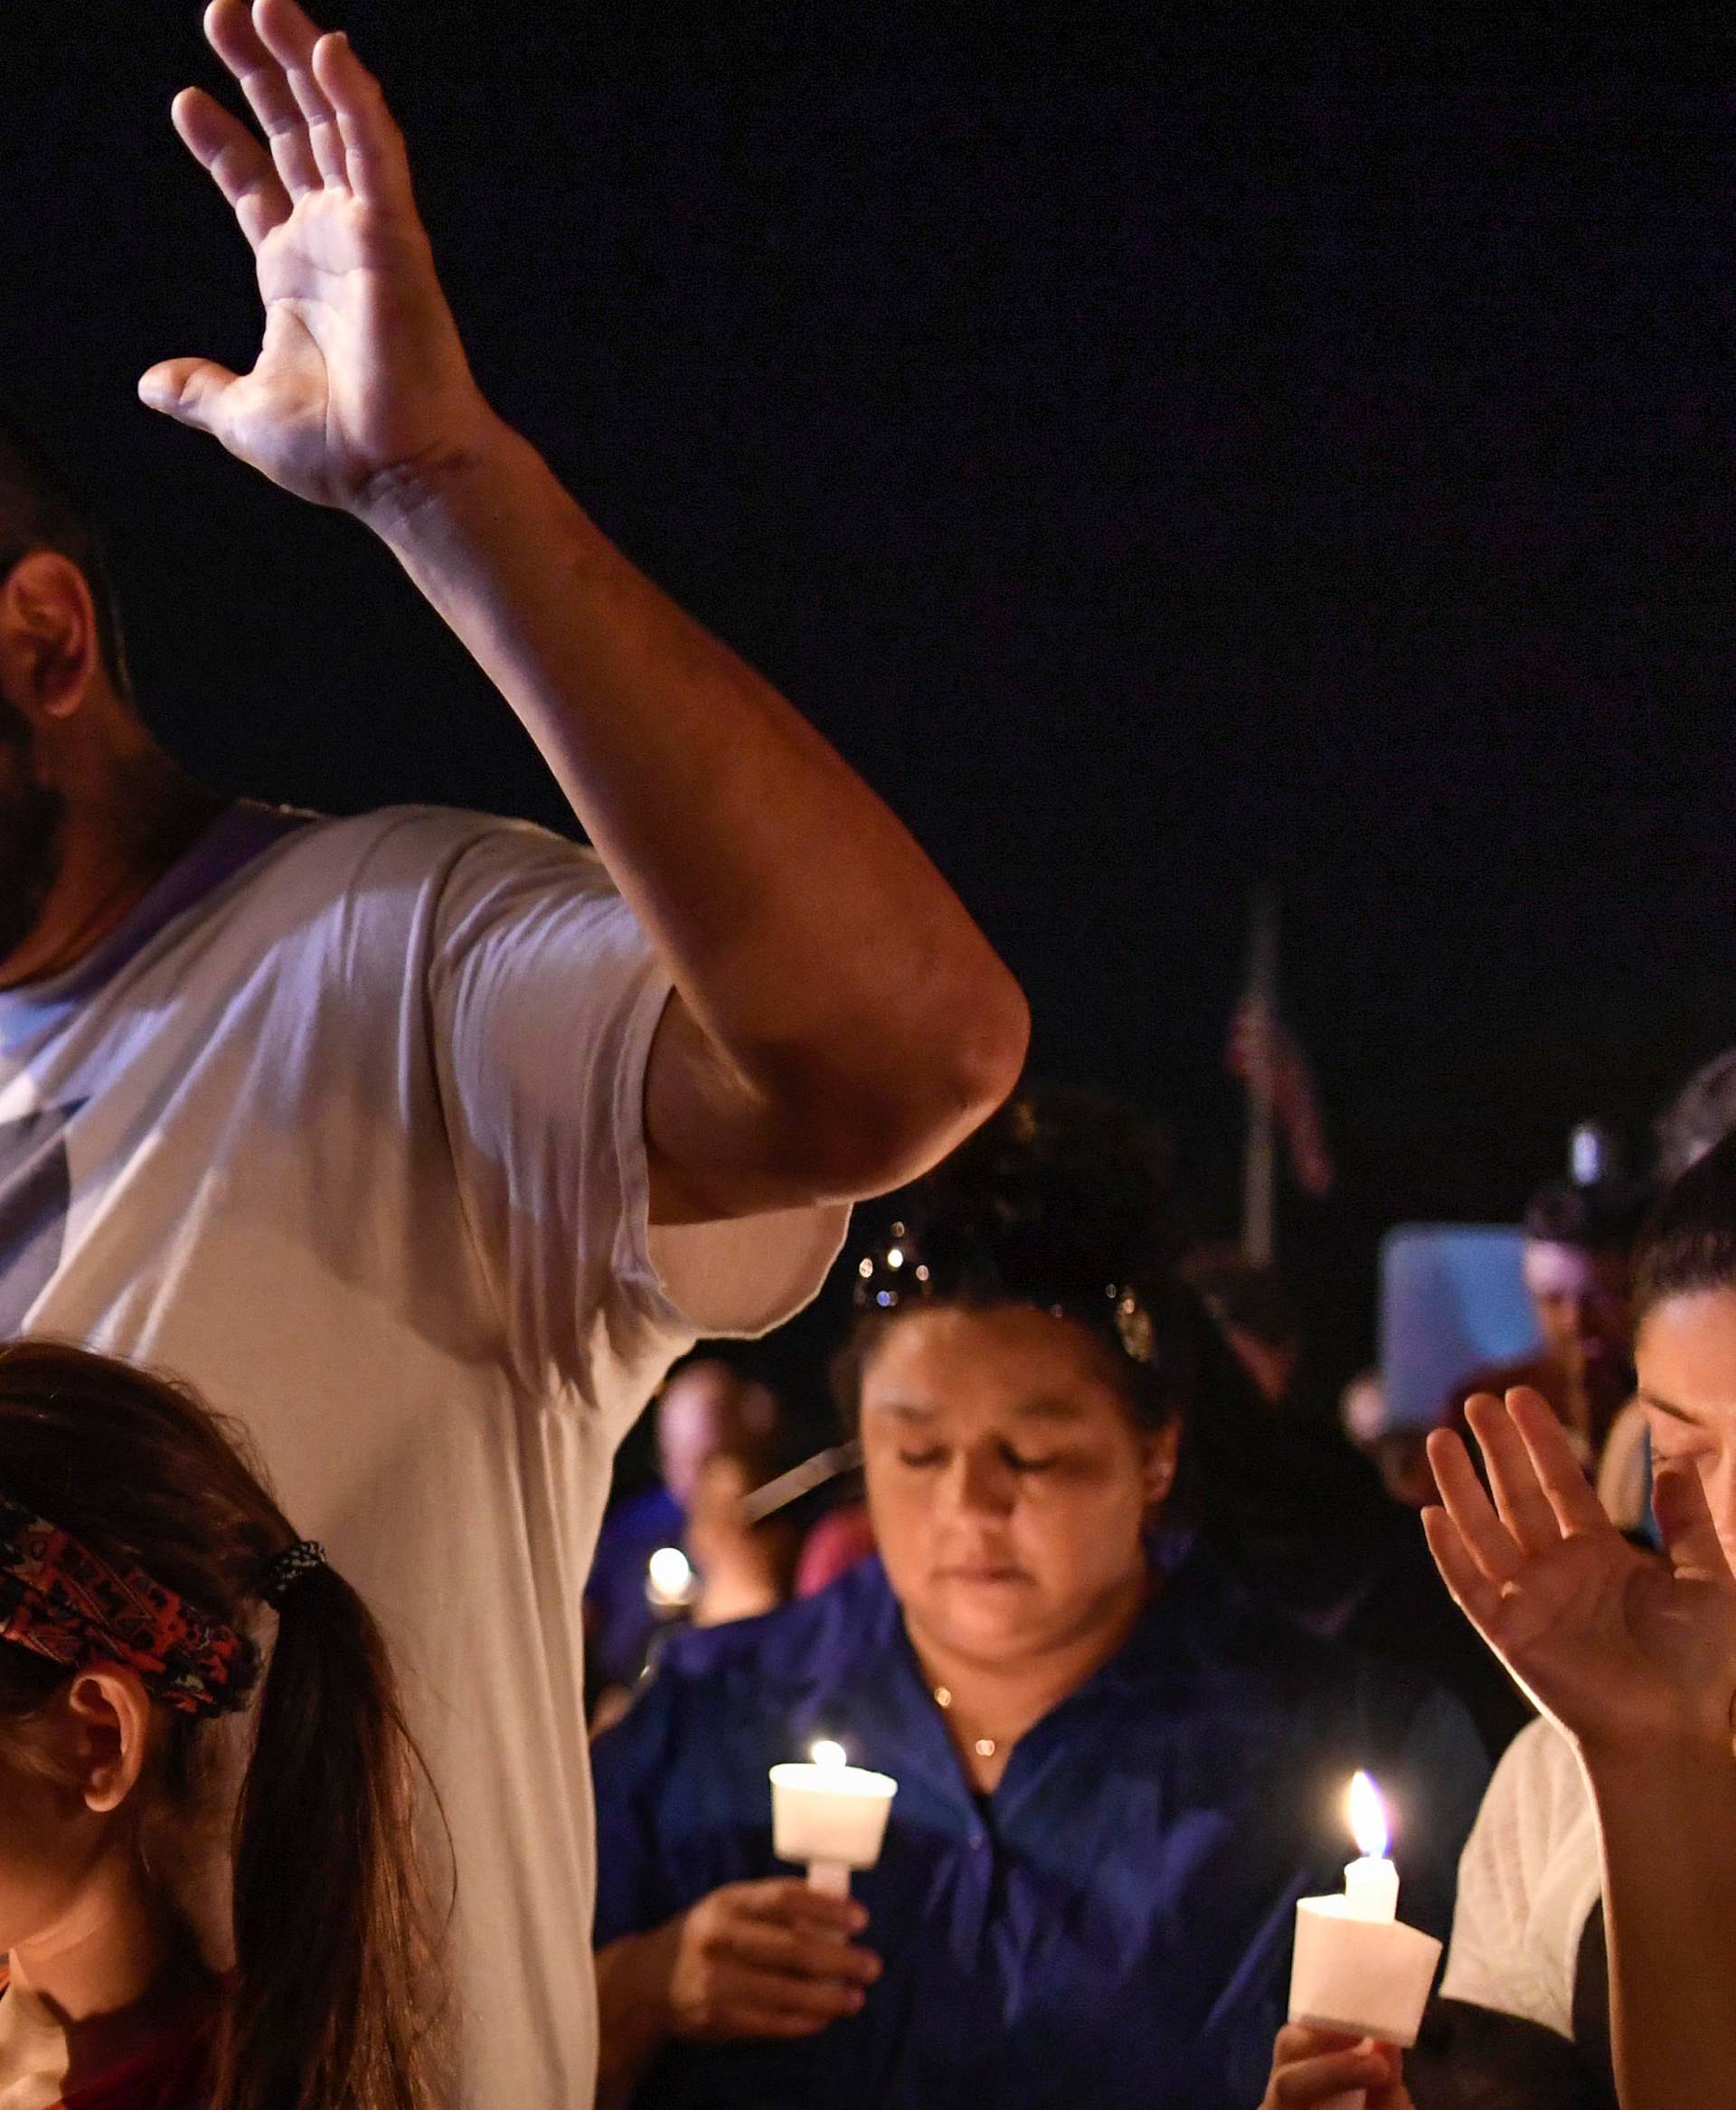 Local residents embrace during a candlelight vigil for victims of a mass shooting in a church in Sutherland Springs, Texas